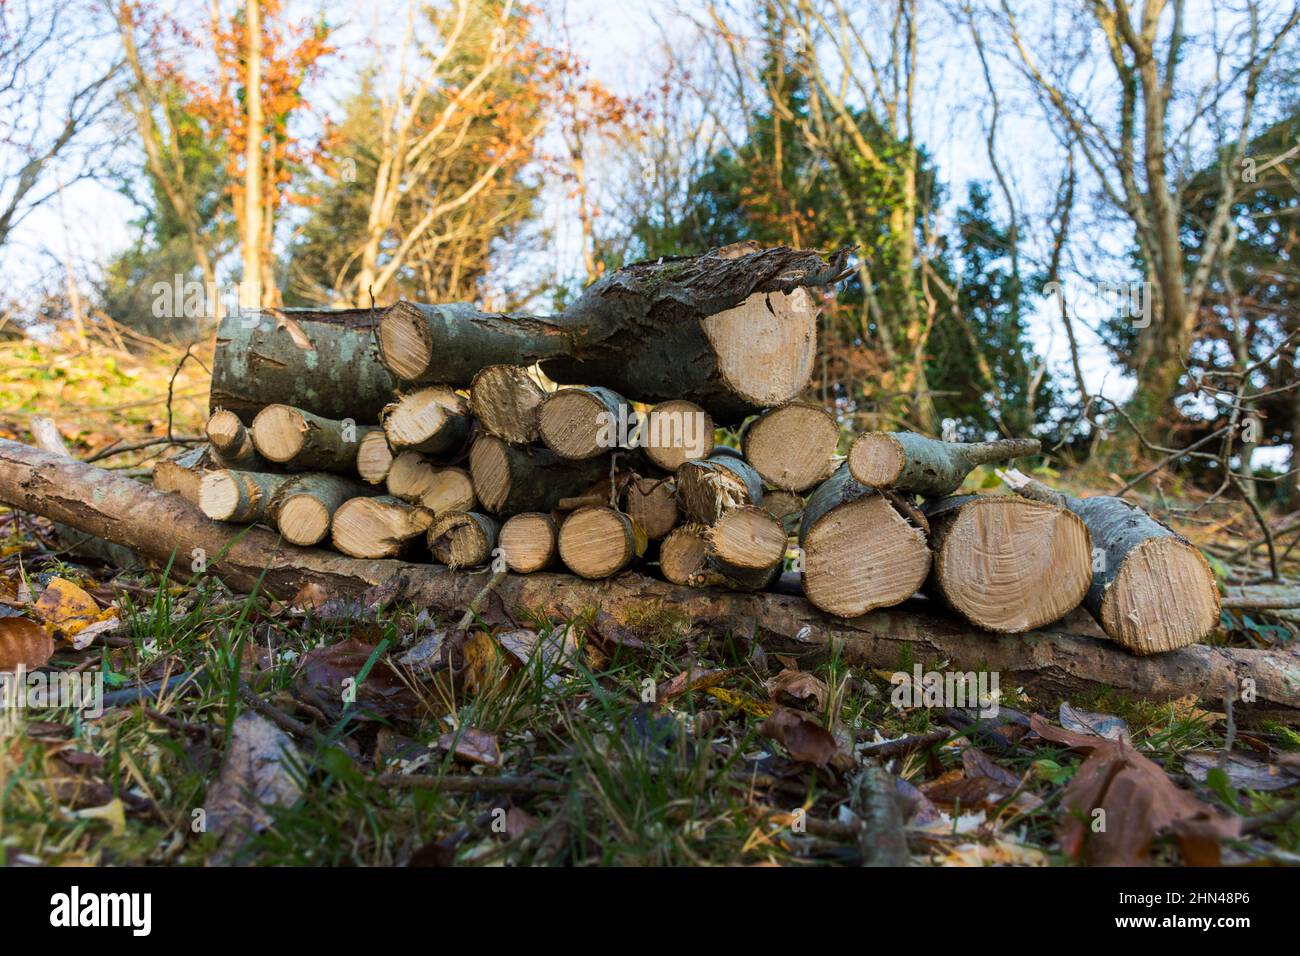 Woodpile. Logs cut for fuel in wood burning stove. County Donegal, Ireland Stock Photo